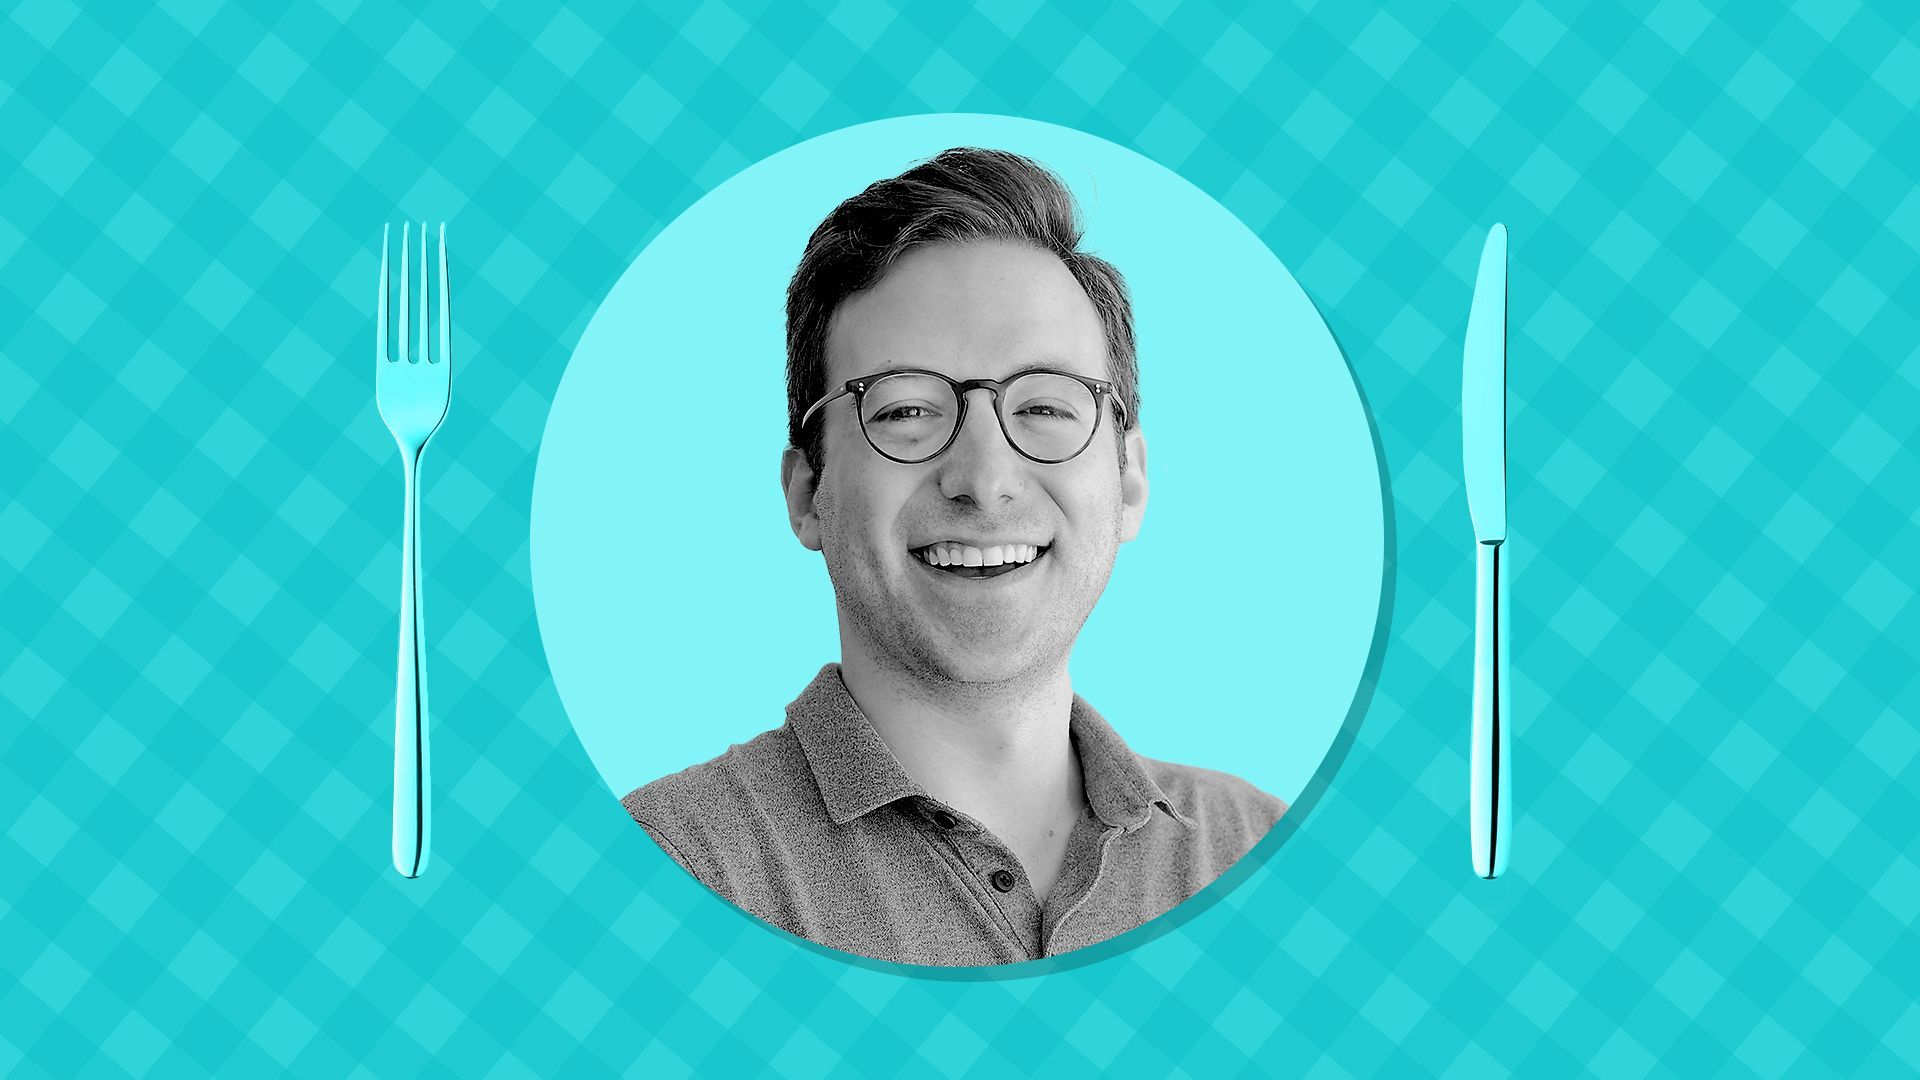 Photo illustration of Brian Harwitt on top of a checkered tablecloth pattern surrounded by a fork and knife.